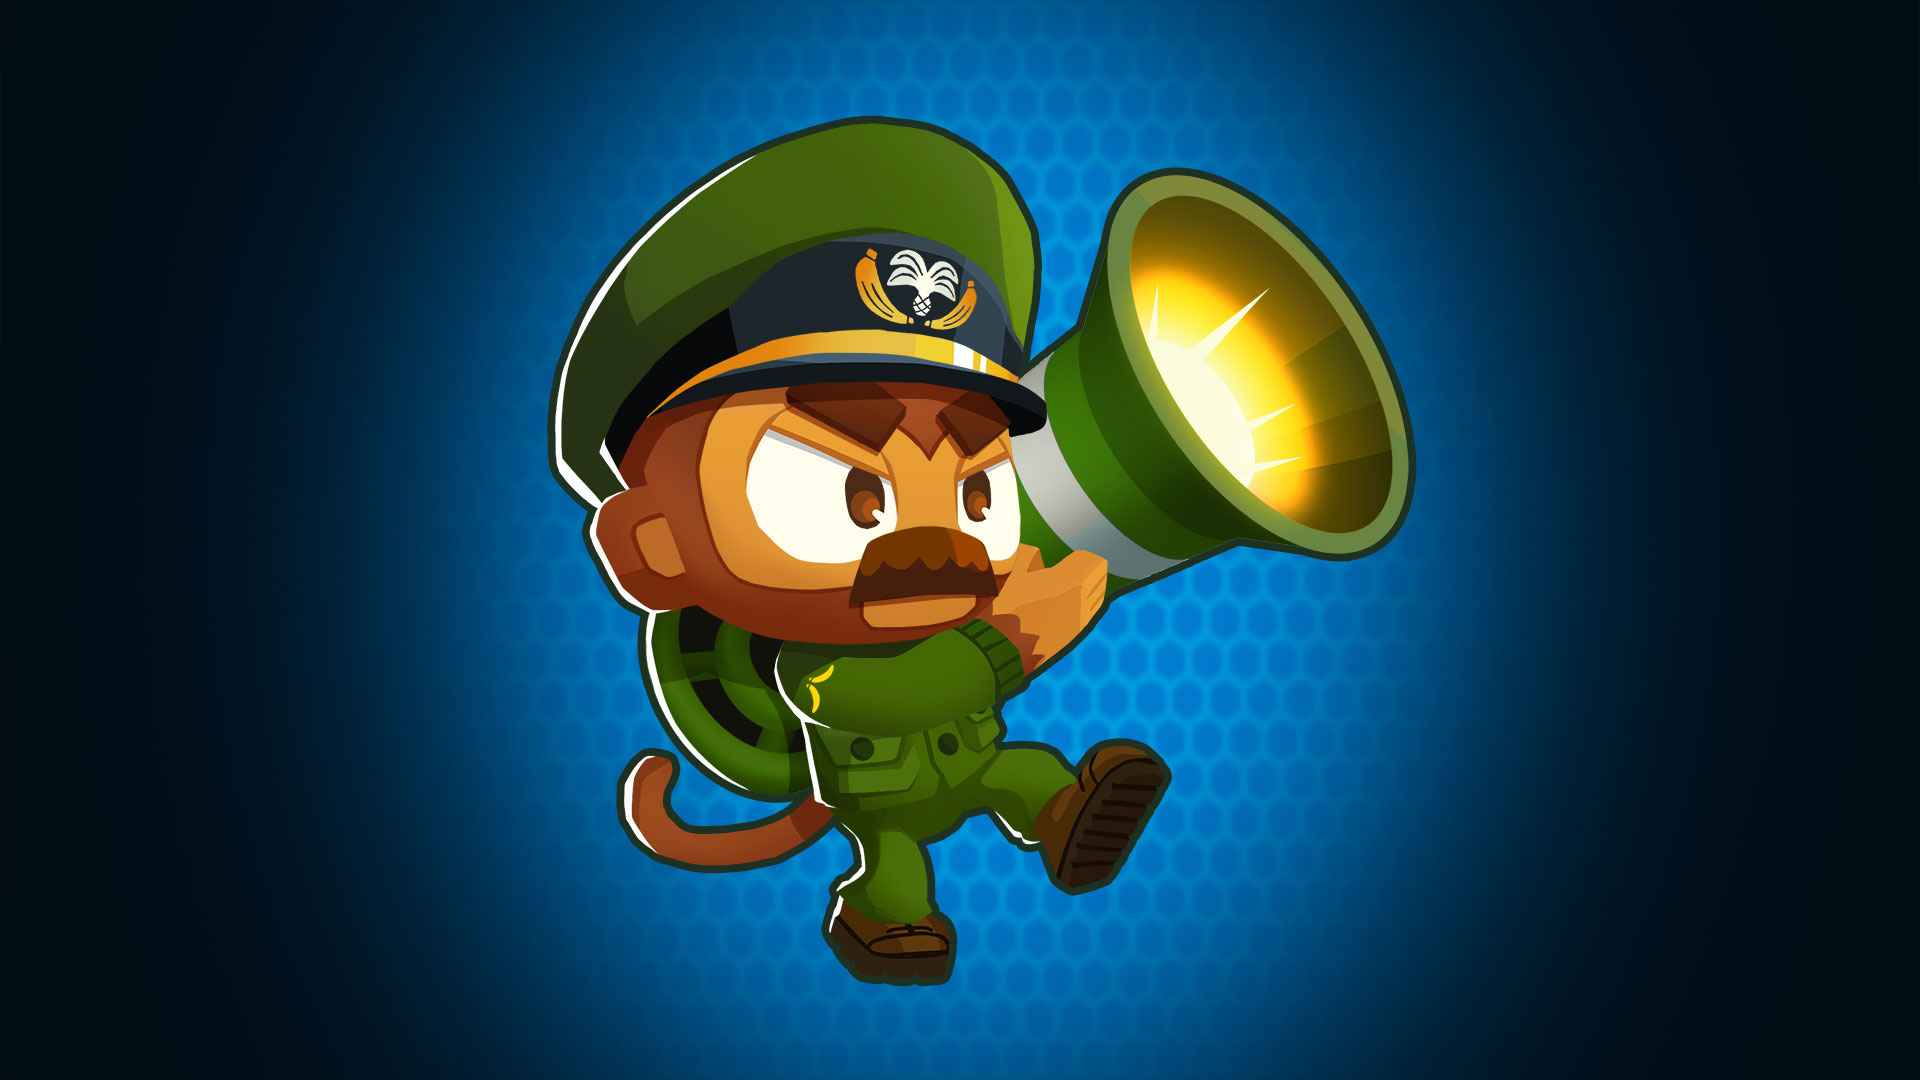 Bloons TD 6 character illustration wallpaper featuring a monkey in military attire with a large cannon, against a blue dotted background.”